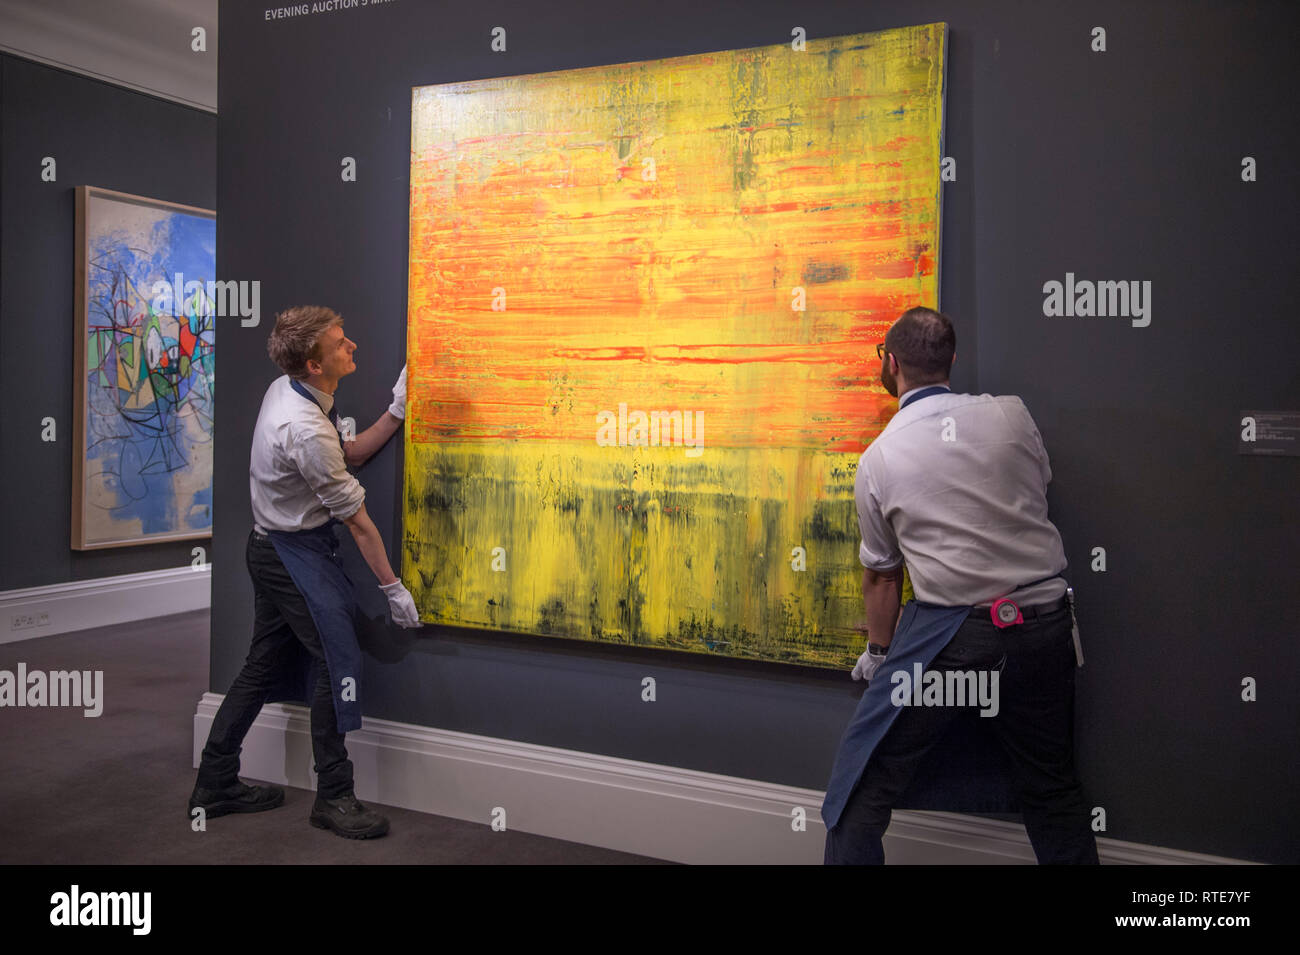 Sotheby's, New Bond Street, London, UK. 1st Mar, 2019. Contemporary Art sale preview. Gerhard Richter, Abstraktes Bild, 20098. Estimated at £6,000,000-8,000,000. The sale takes place on 5 March 2019. Credit: Malcolm Park/Alamy Live News Stock Photo